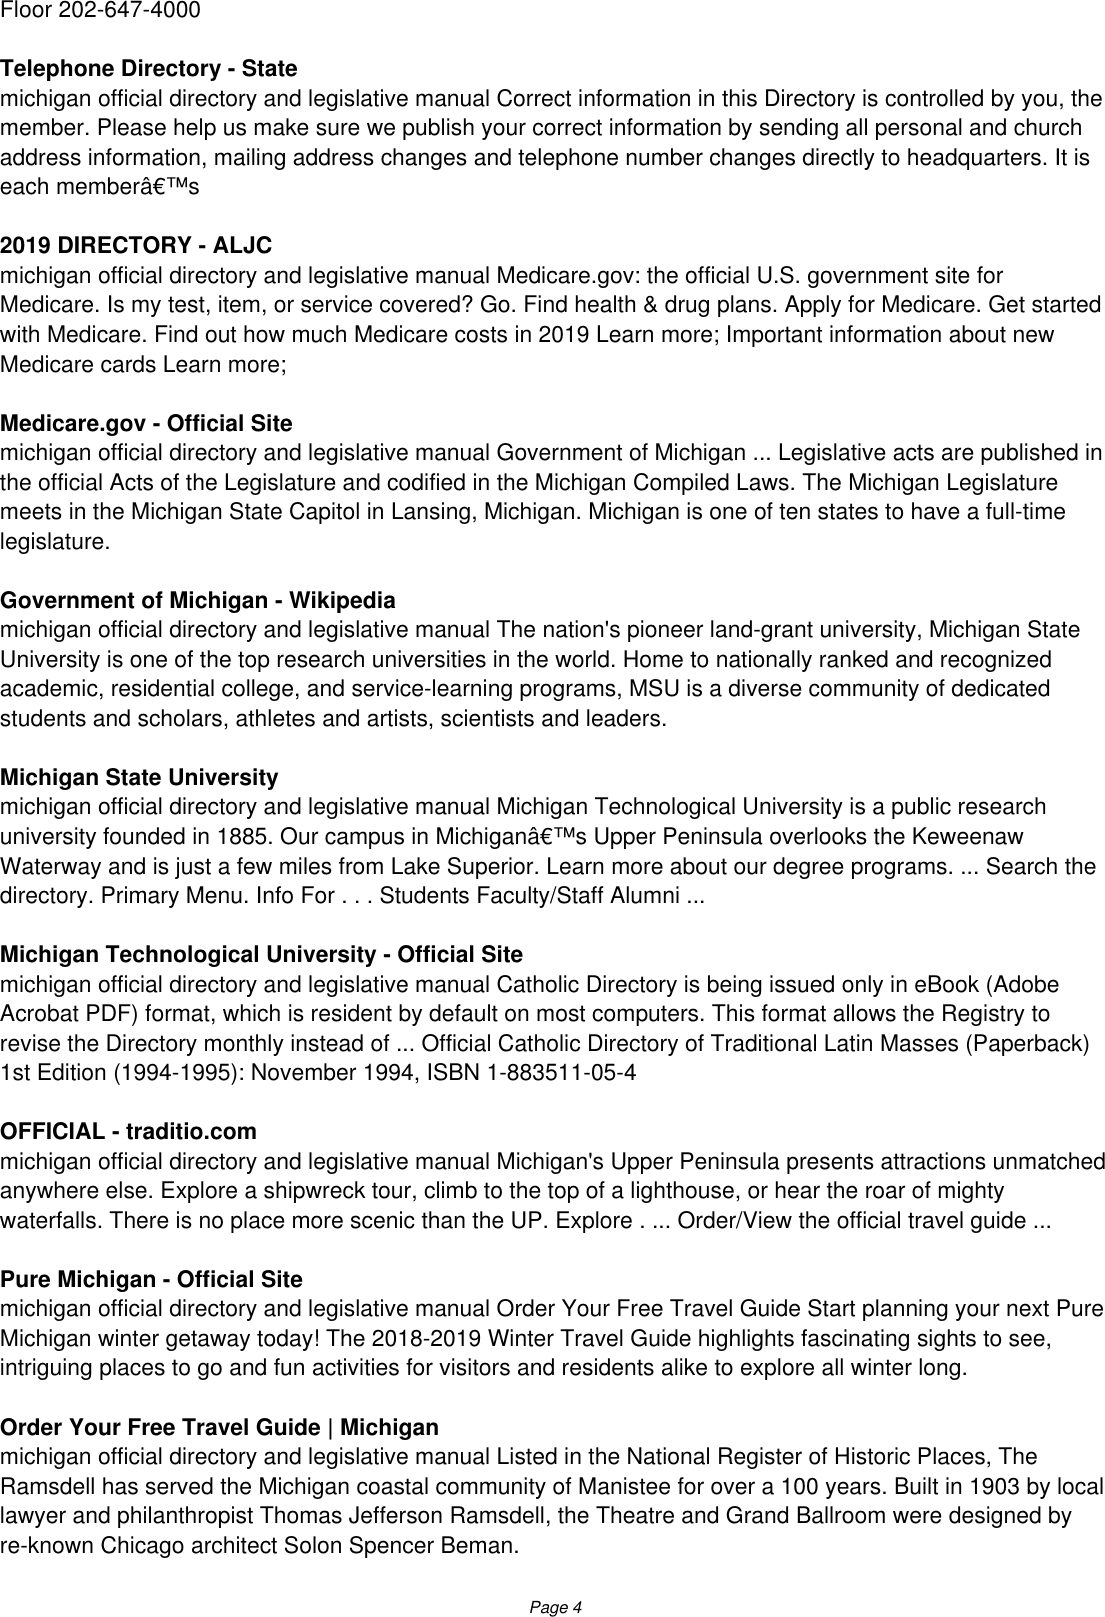 Page 4 of 8 - Michigan Official Directory And Legislative Manual